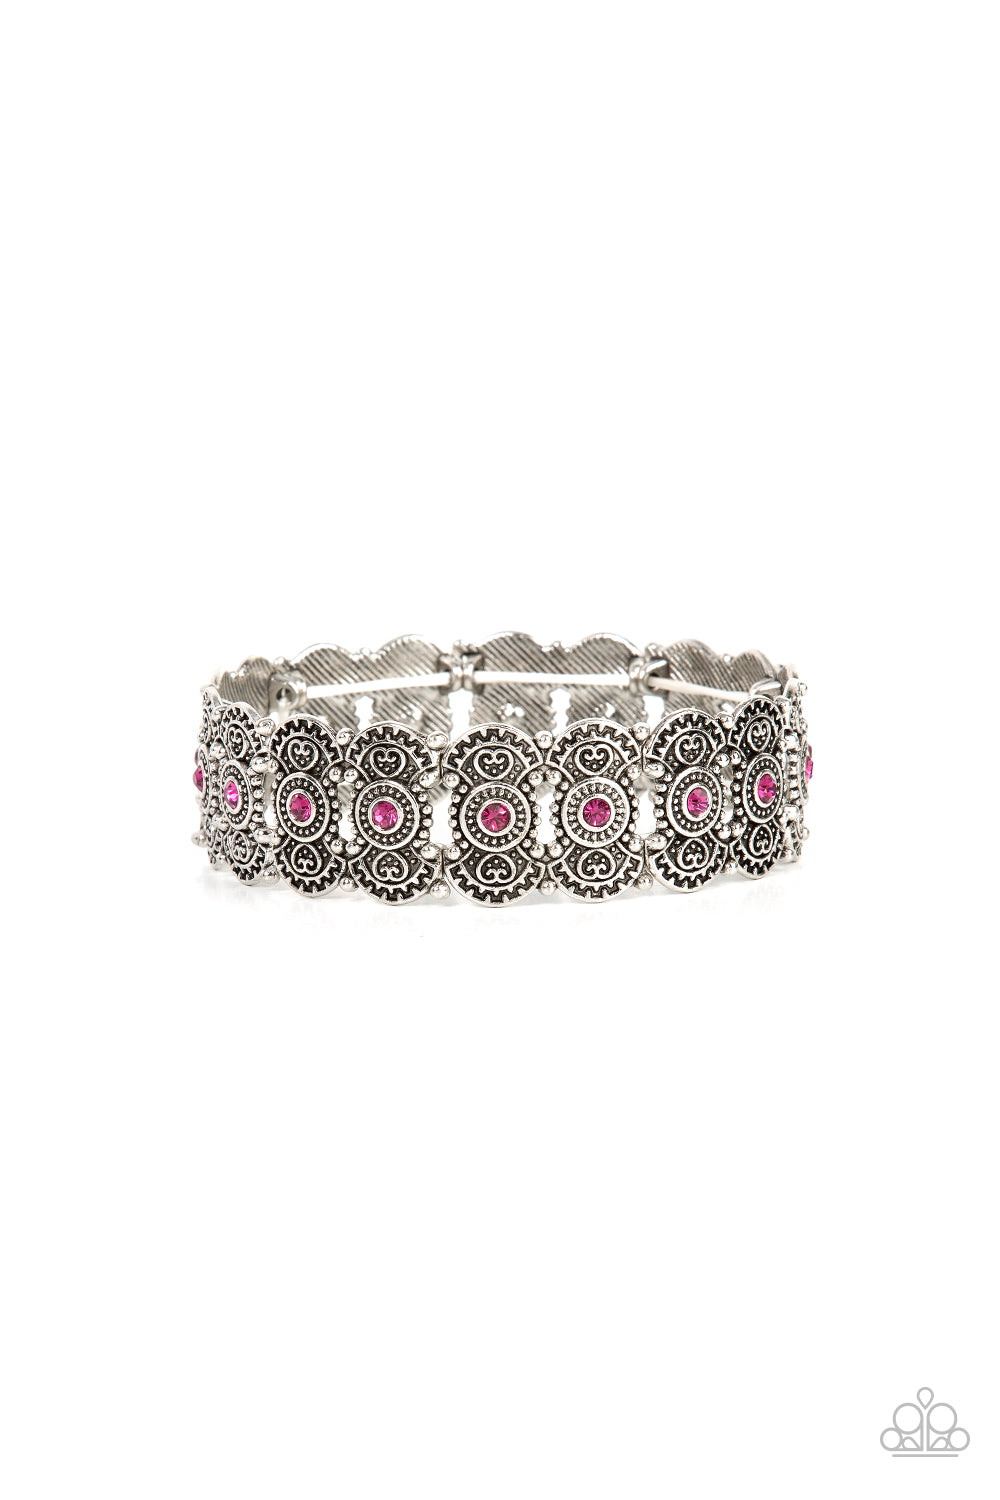 Rapturous Romance Pink Bracelet - Paparazzi Accessories  Dotted with sparkly pink rhinestones, pairs of studded and heart embossed patterned silver frames are threaded along stretchy bands around the wrist for a romantic fashion.  Sold as one individual bracelet.